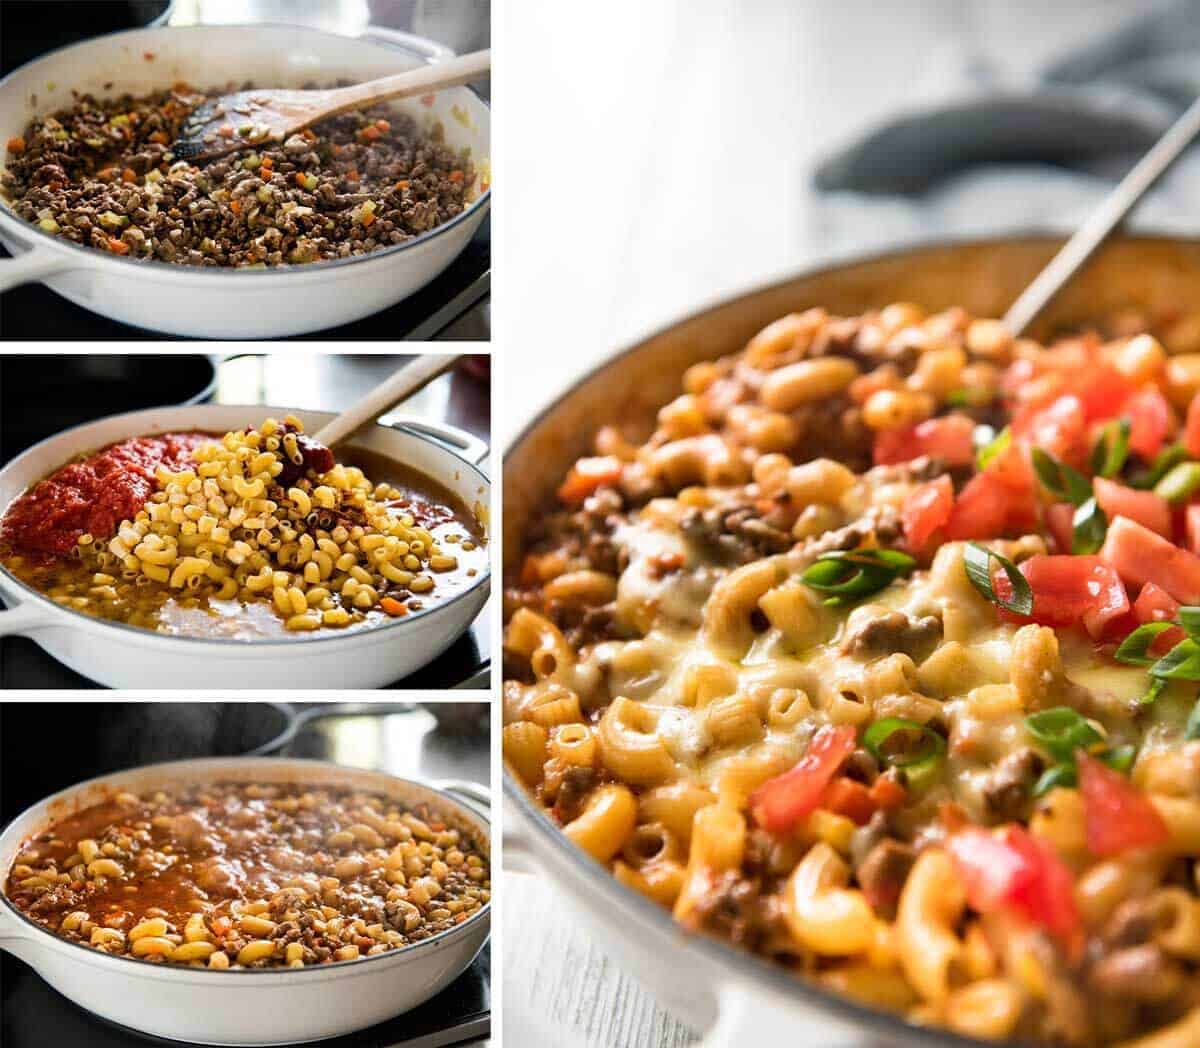 Cheeseburger Casserole / Homemade Hamburger Helper - Beefy, cheesy and saucy, this is a homemade version of the American favourite Hamburger Helper. One pot, 30 minutes! www.recipetineats.com